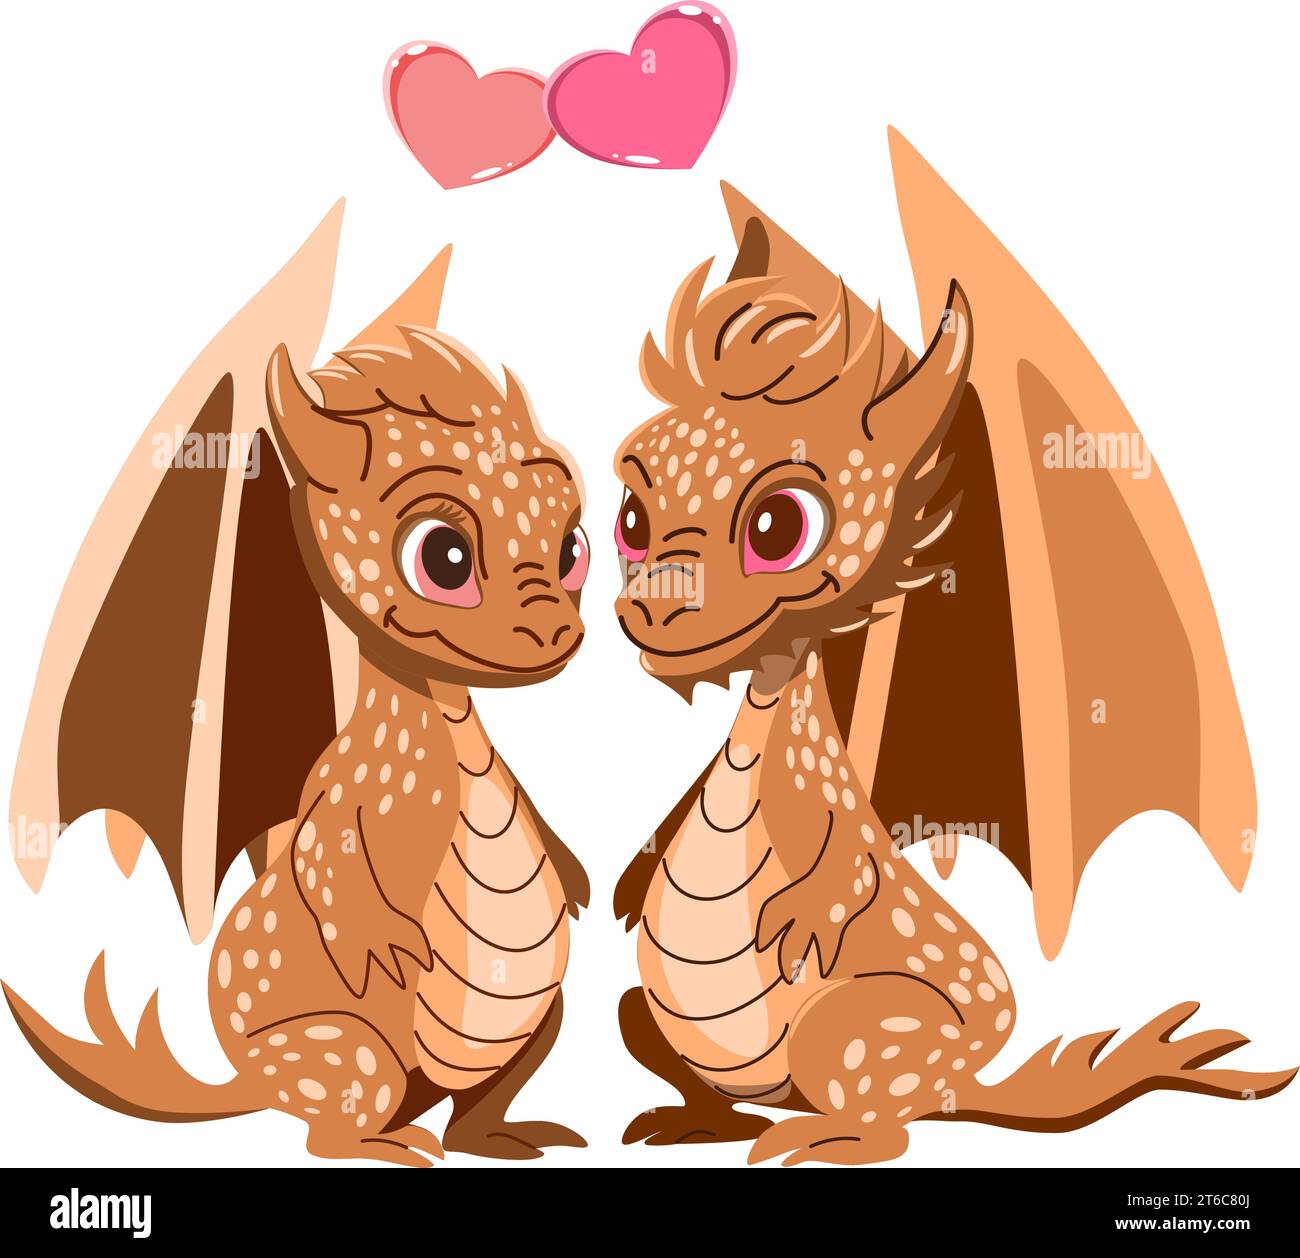 Cute cartoon dragon couple in love. Vector illustration isolated on white background. Stock Vector